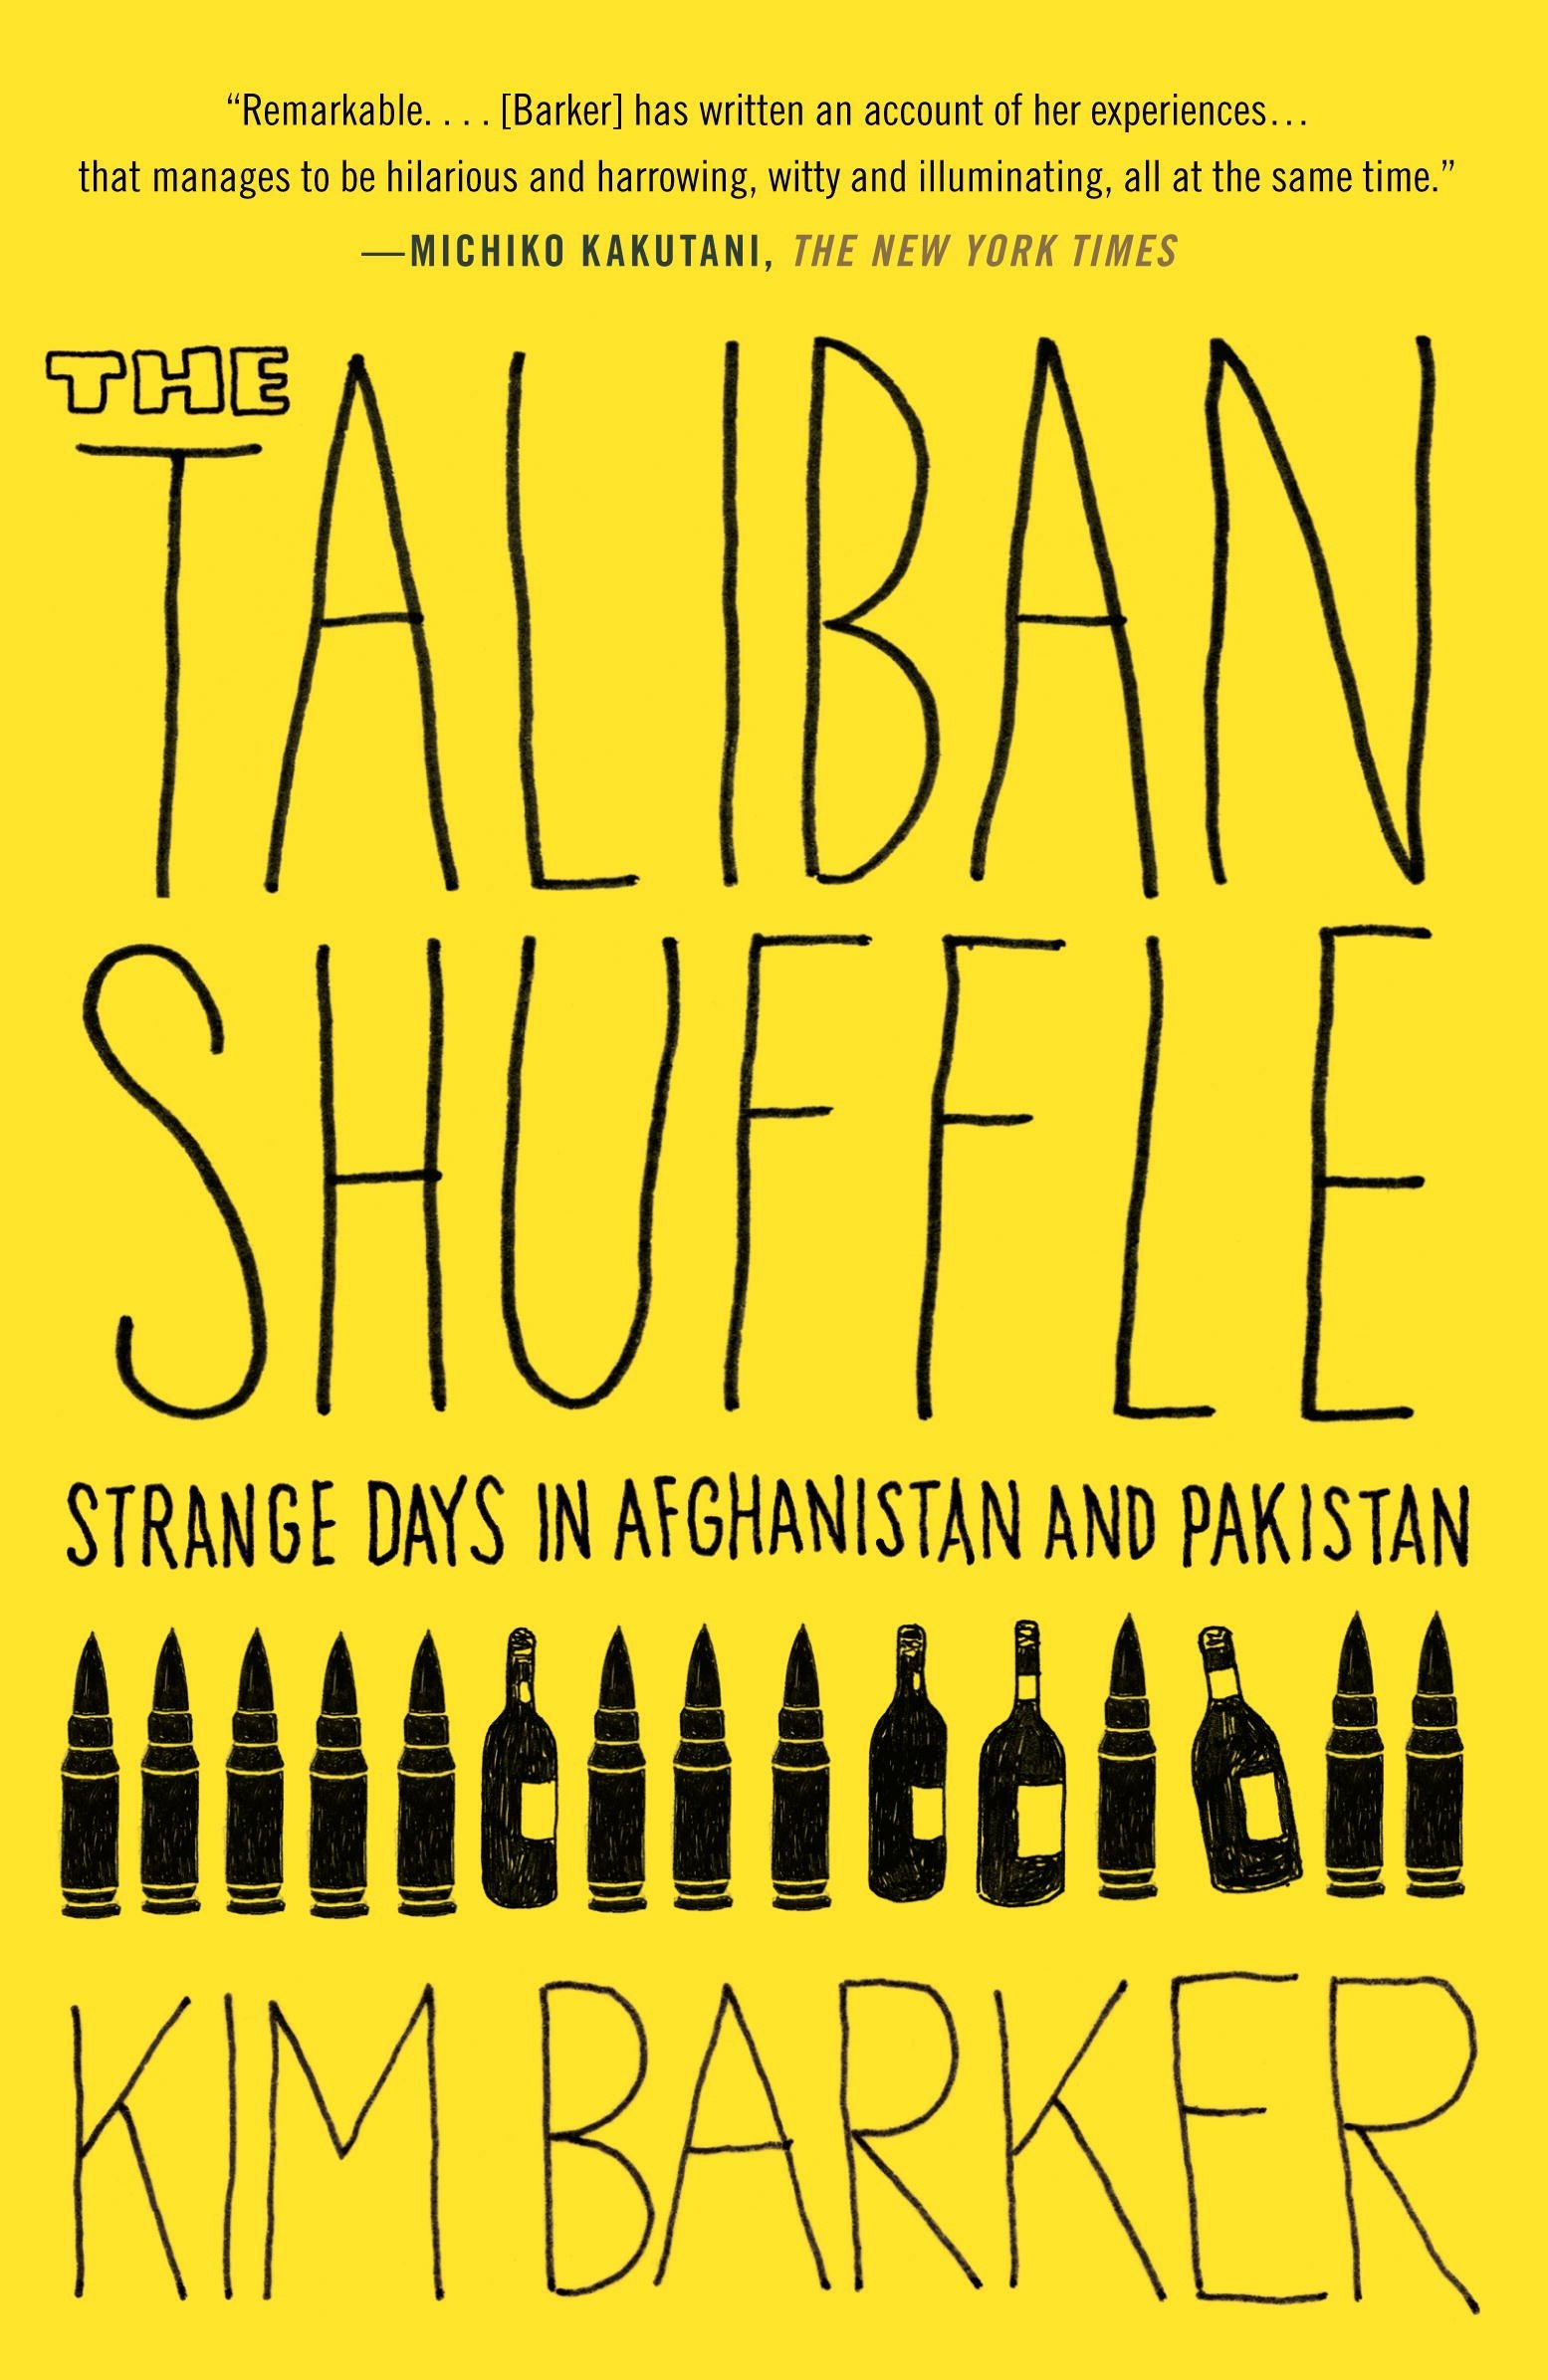 Image de couverture de The Taliban Shuffle [electronic resource] : Strange Days in Afghanistan and Pakistan